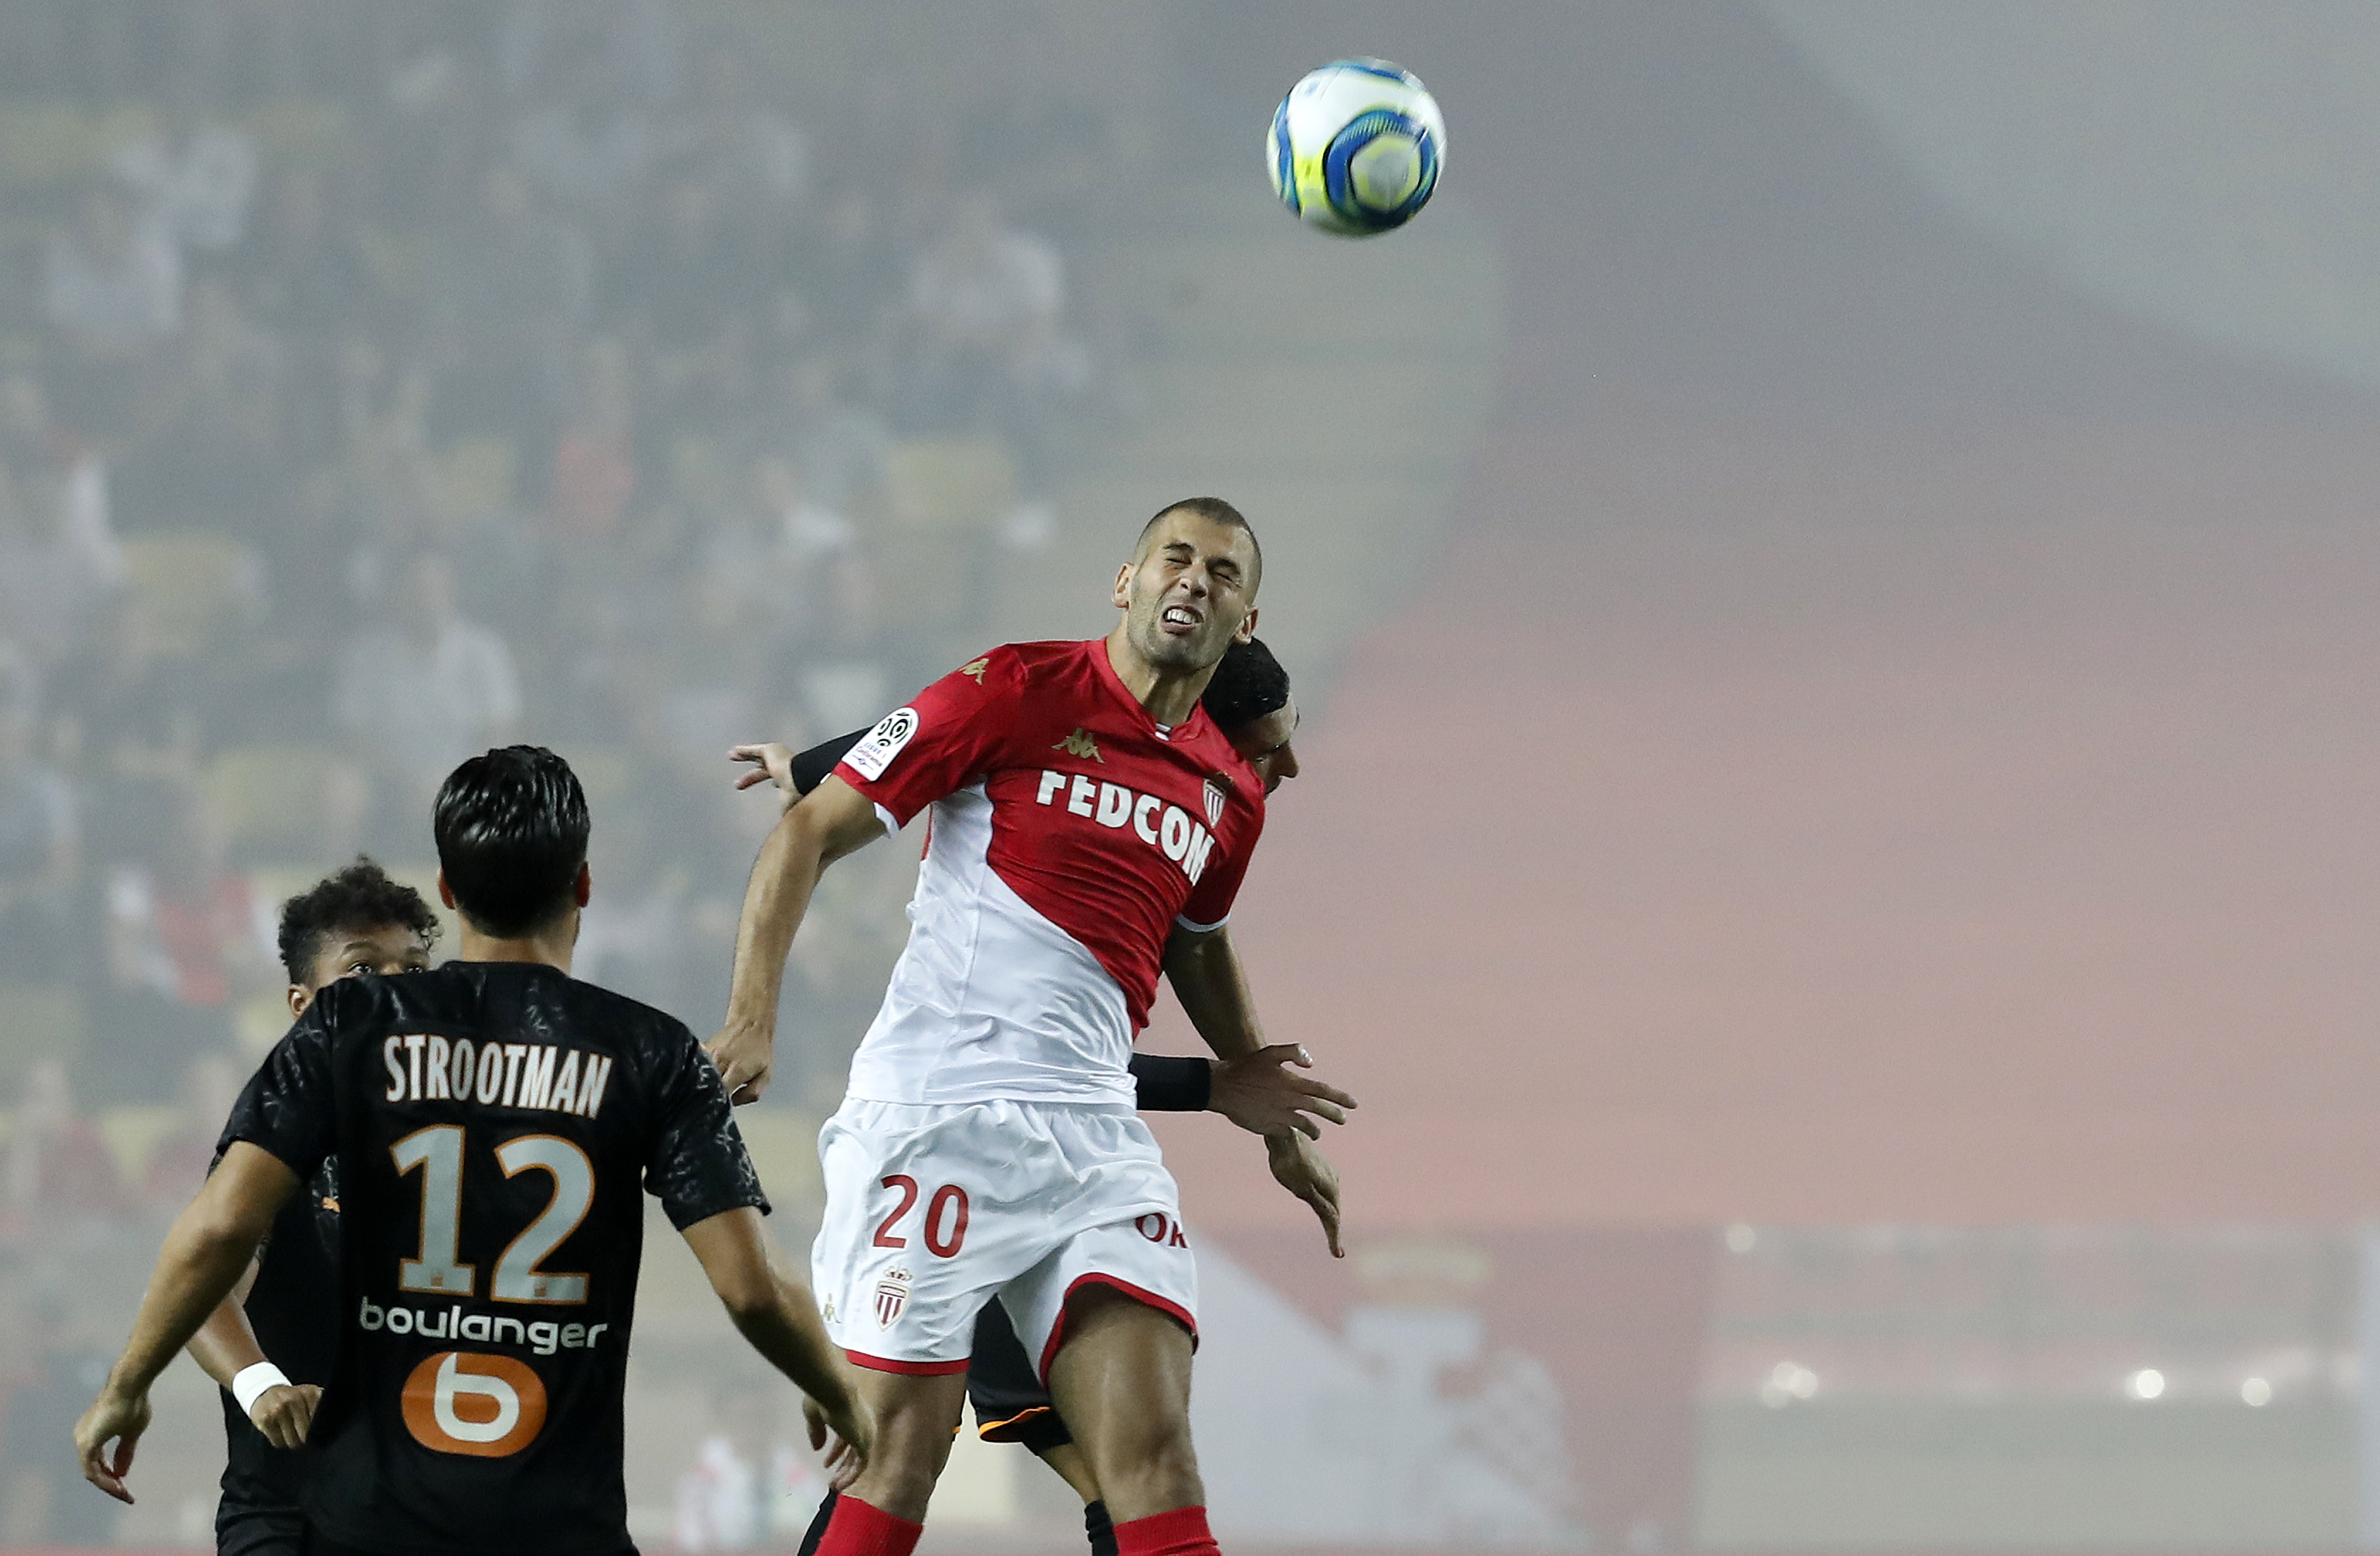 epa07845467 Islam Slimani of AS Monaco in action during the French Ligue 1 soccer match, AS Monaco vs Olympique Marseille, at Stade Louis II, in Monaco, 15 September 2019.  EPA/SEBASTIEN NOGIER